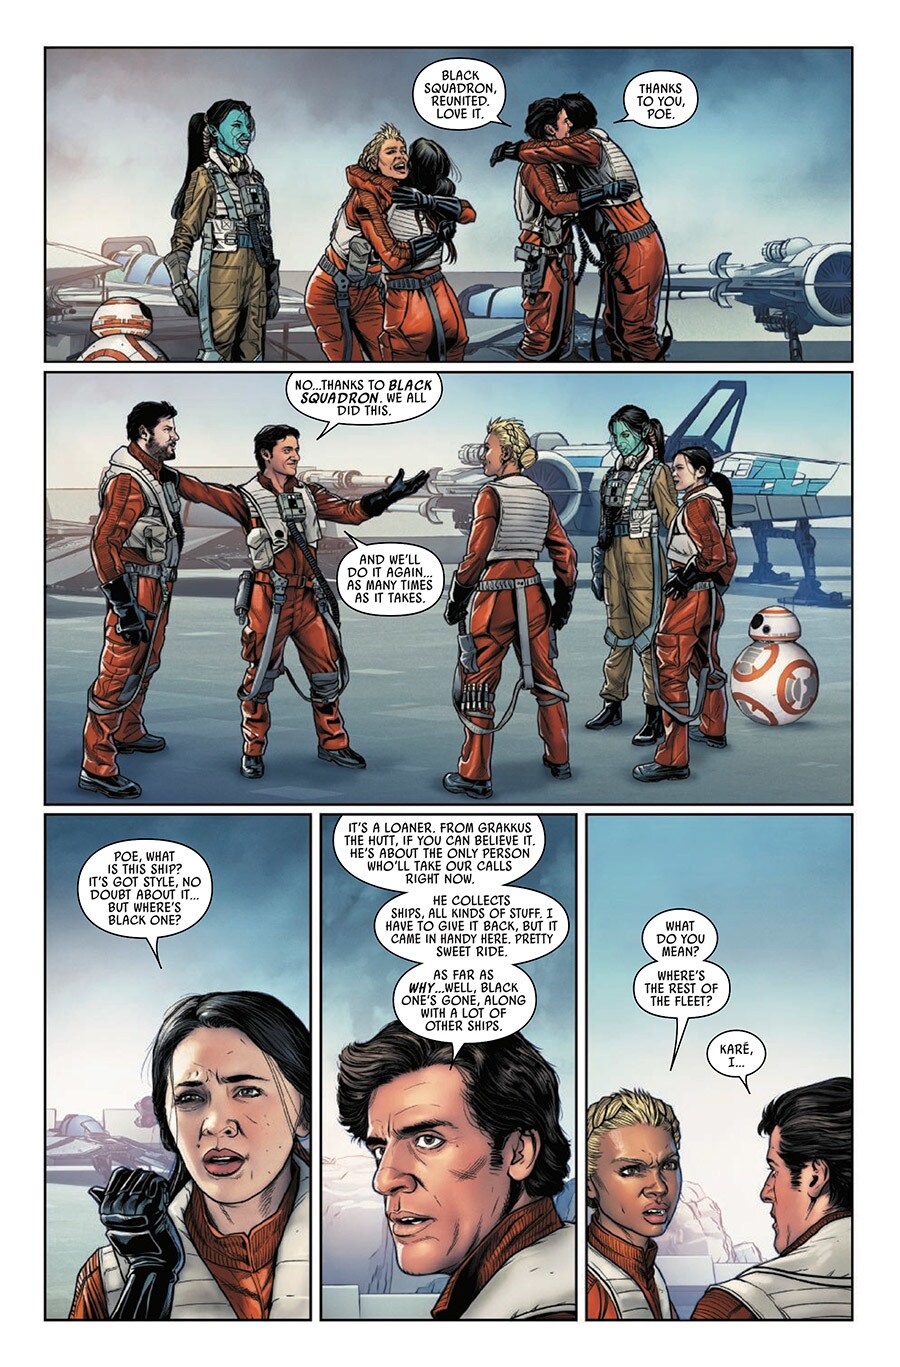 Page 32 from Poe Dameron #31.